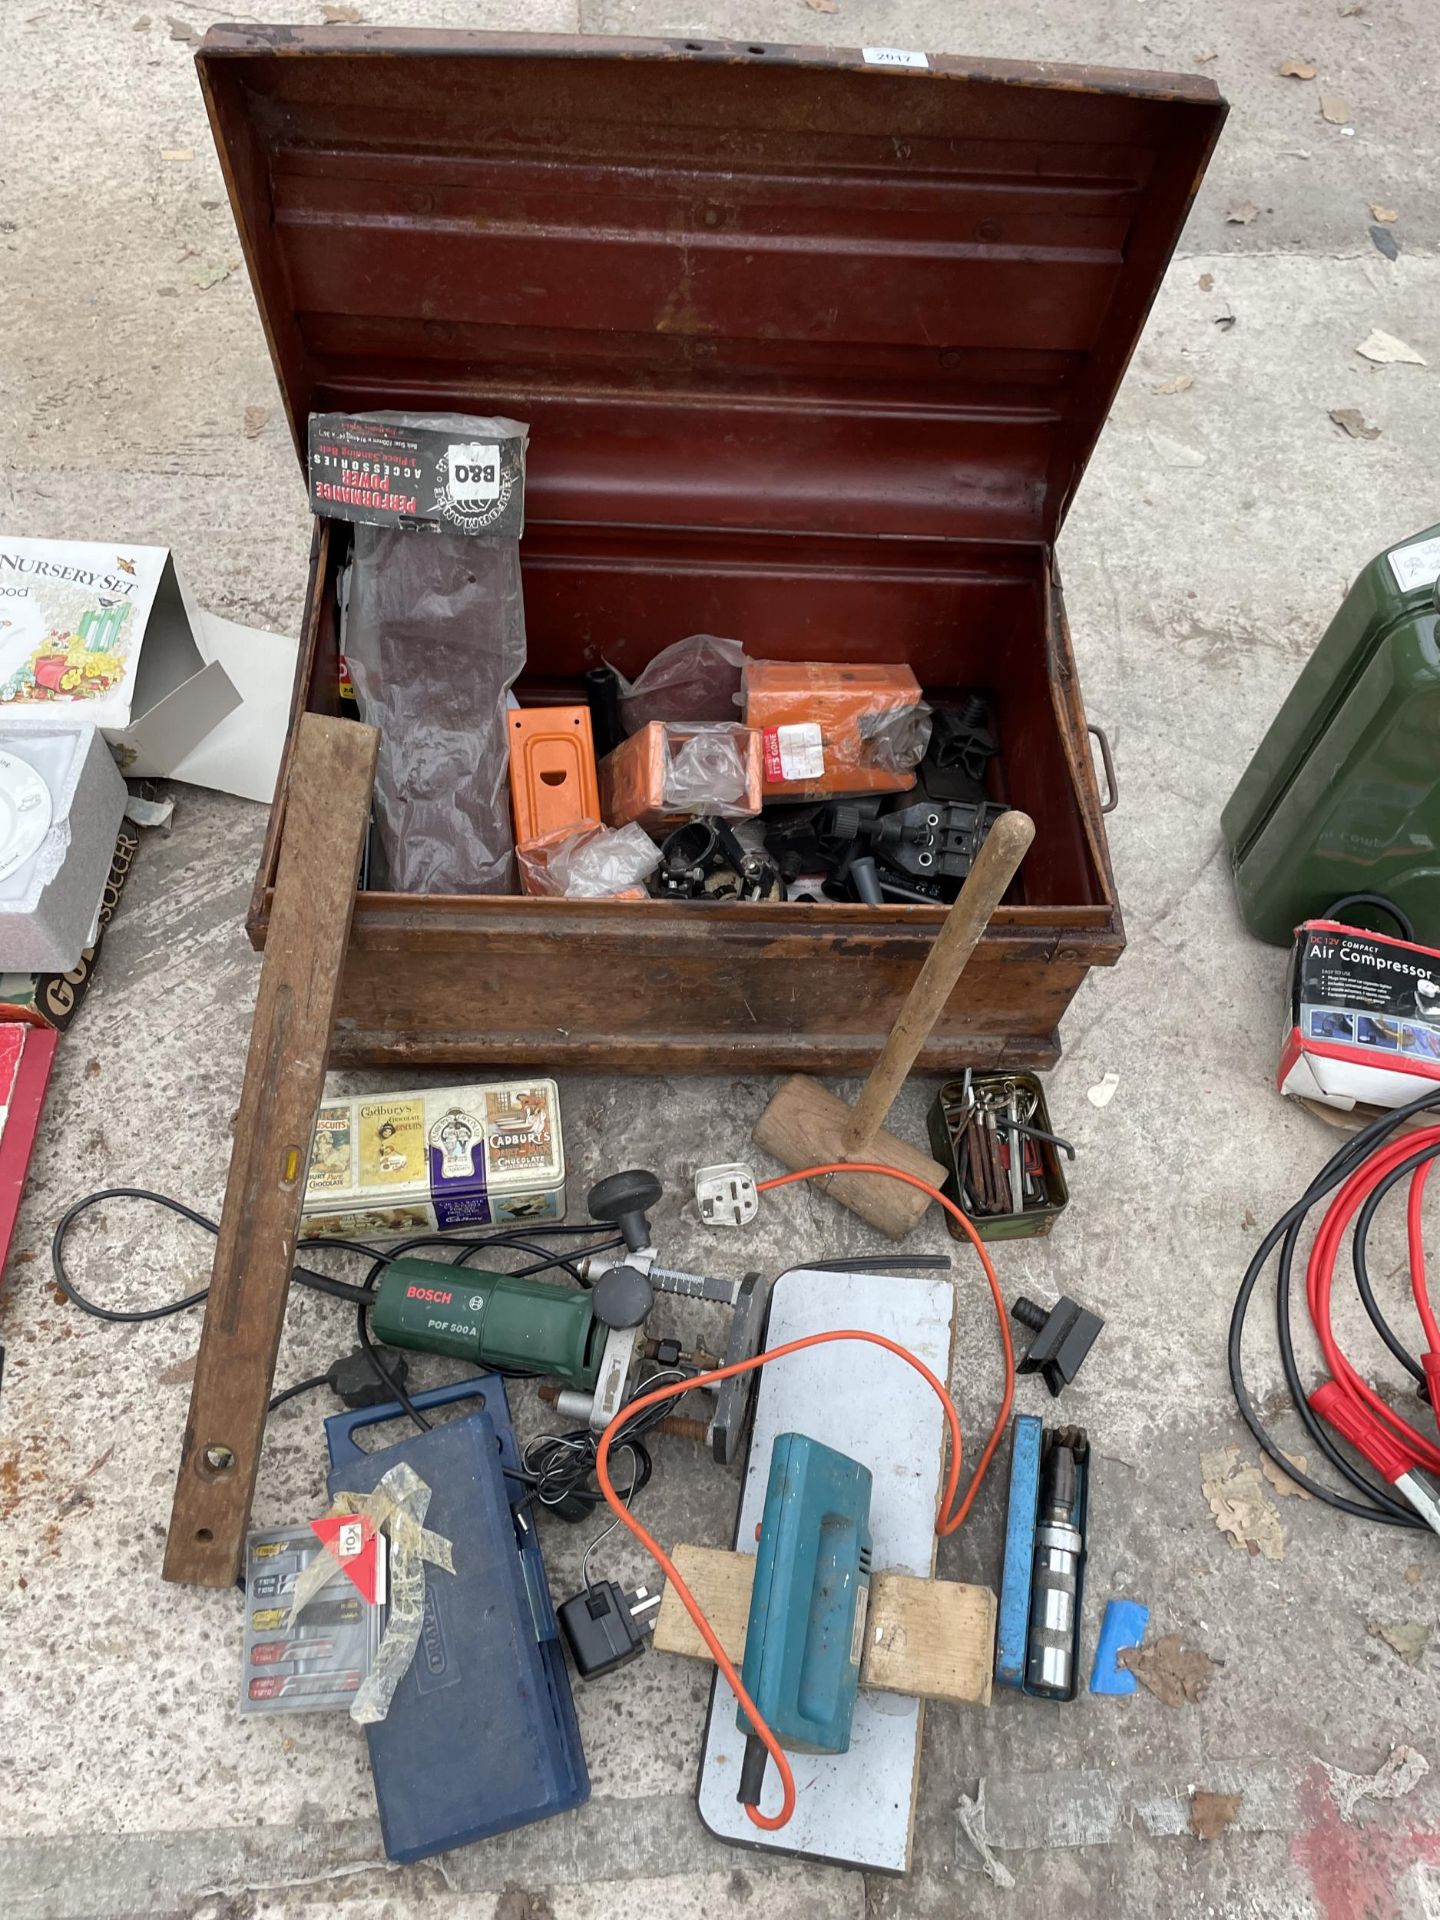 A VINTAGE TRAVEL TRUNK WITH AN ASSORTMENT OF TOOLS TO INCLUDE A BOSCH ROUTER, ALAN KEYS AND DRILL